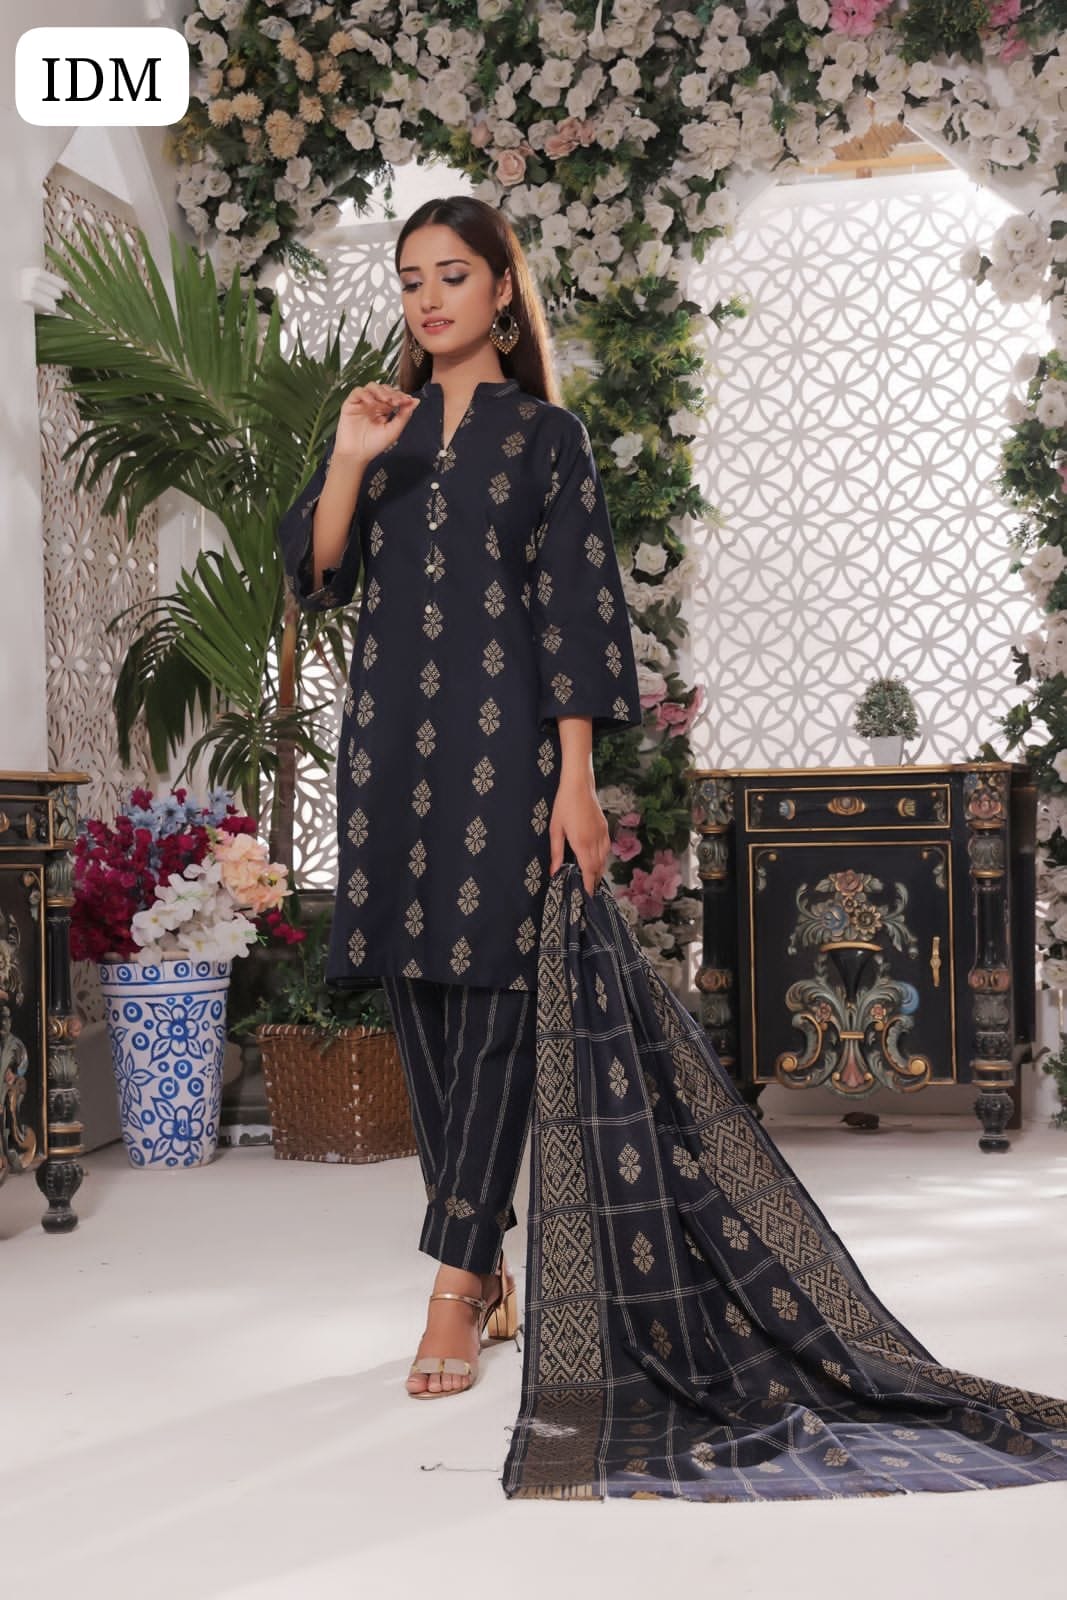 STAPLE SUSSI FABRIC JACQUARD WORK SHIRT WITH SUSSI LINING TROUSER AND CHECK JACQUARD SUSSI HEAVY SHAWL DUPPATTA 3PC DRESS